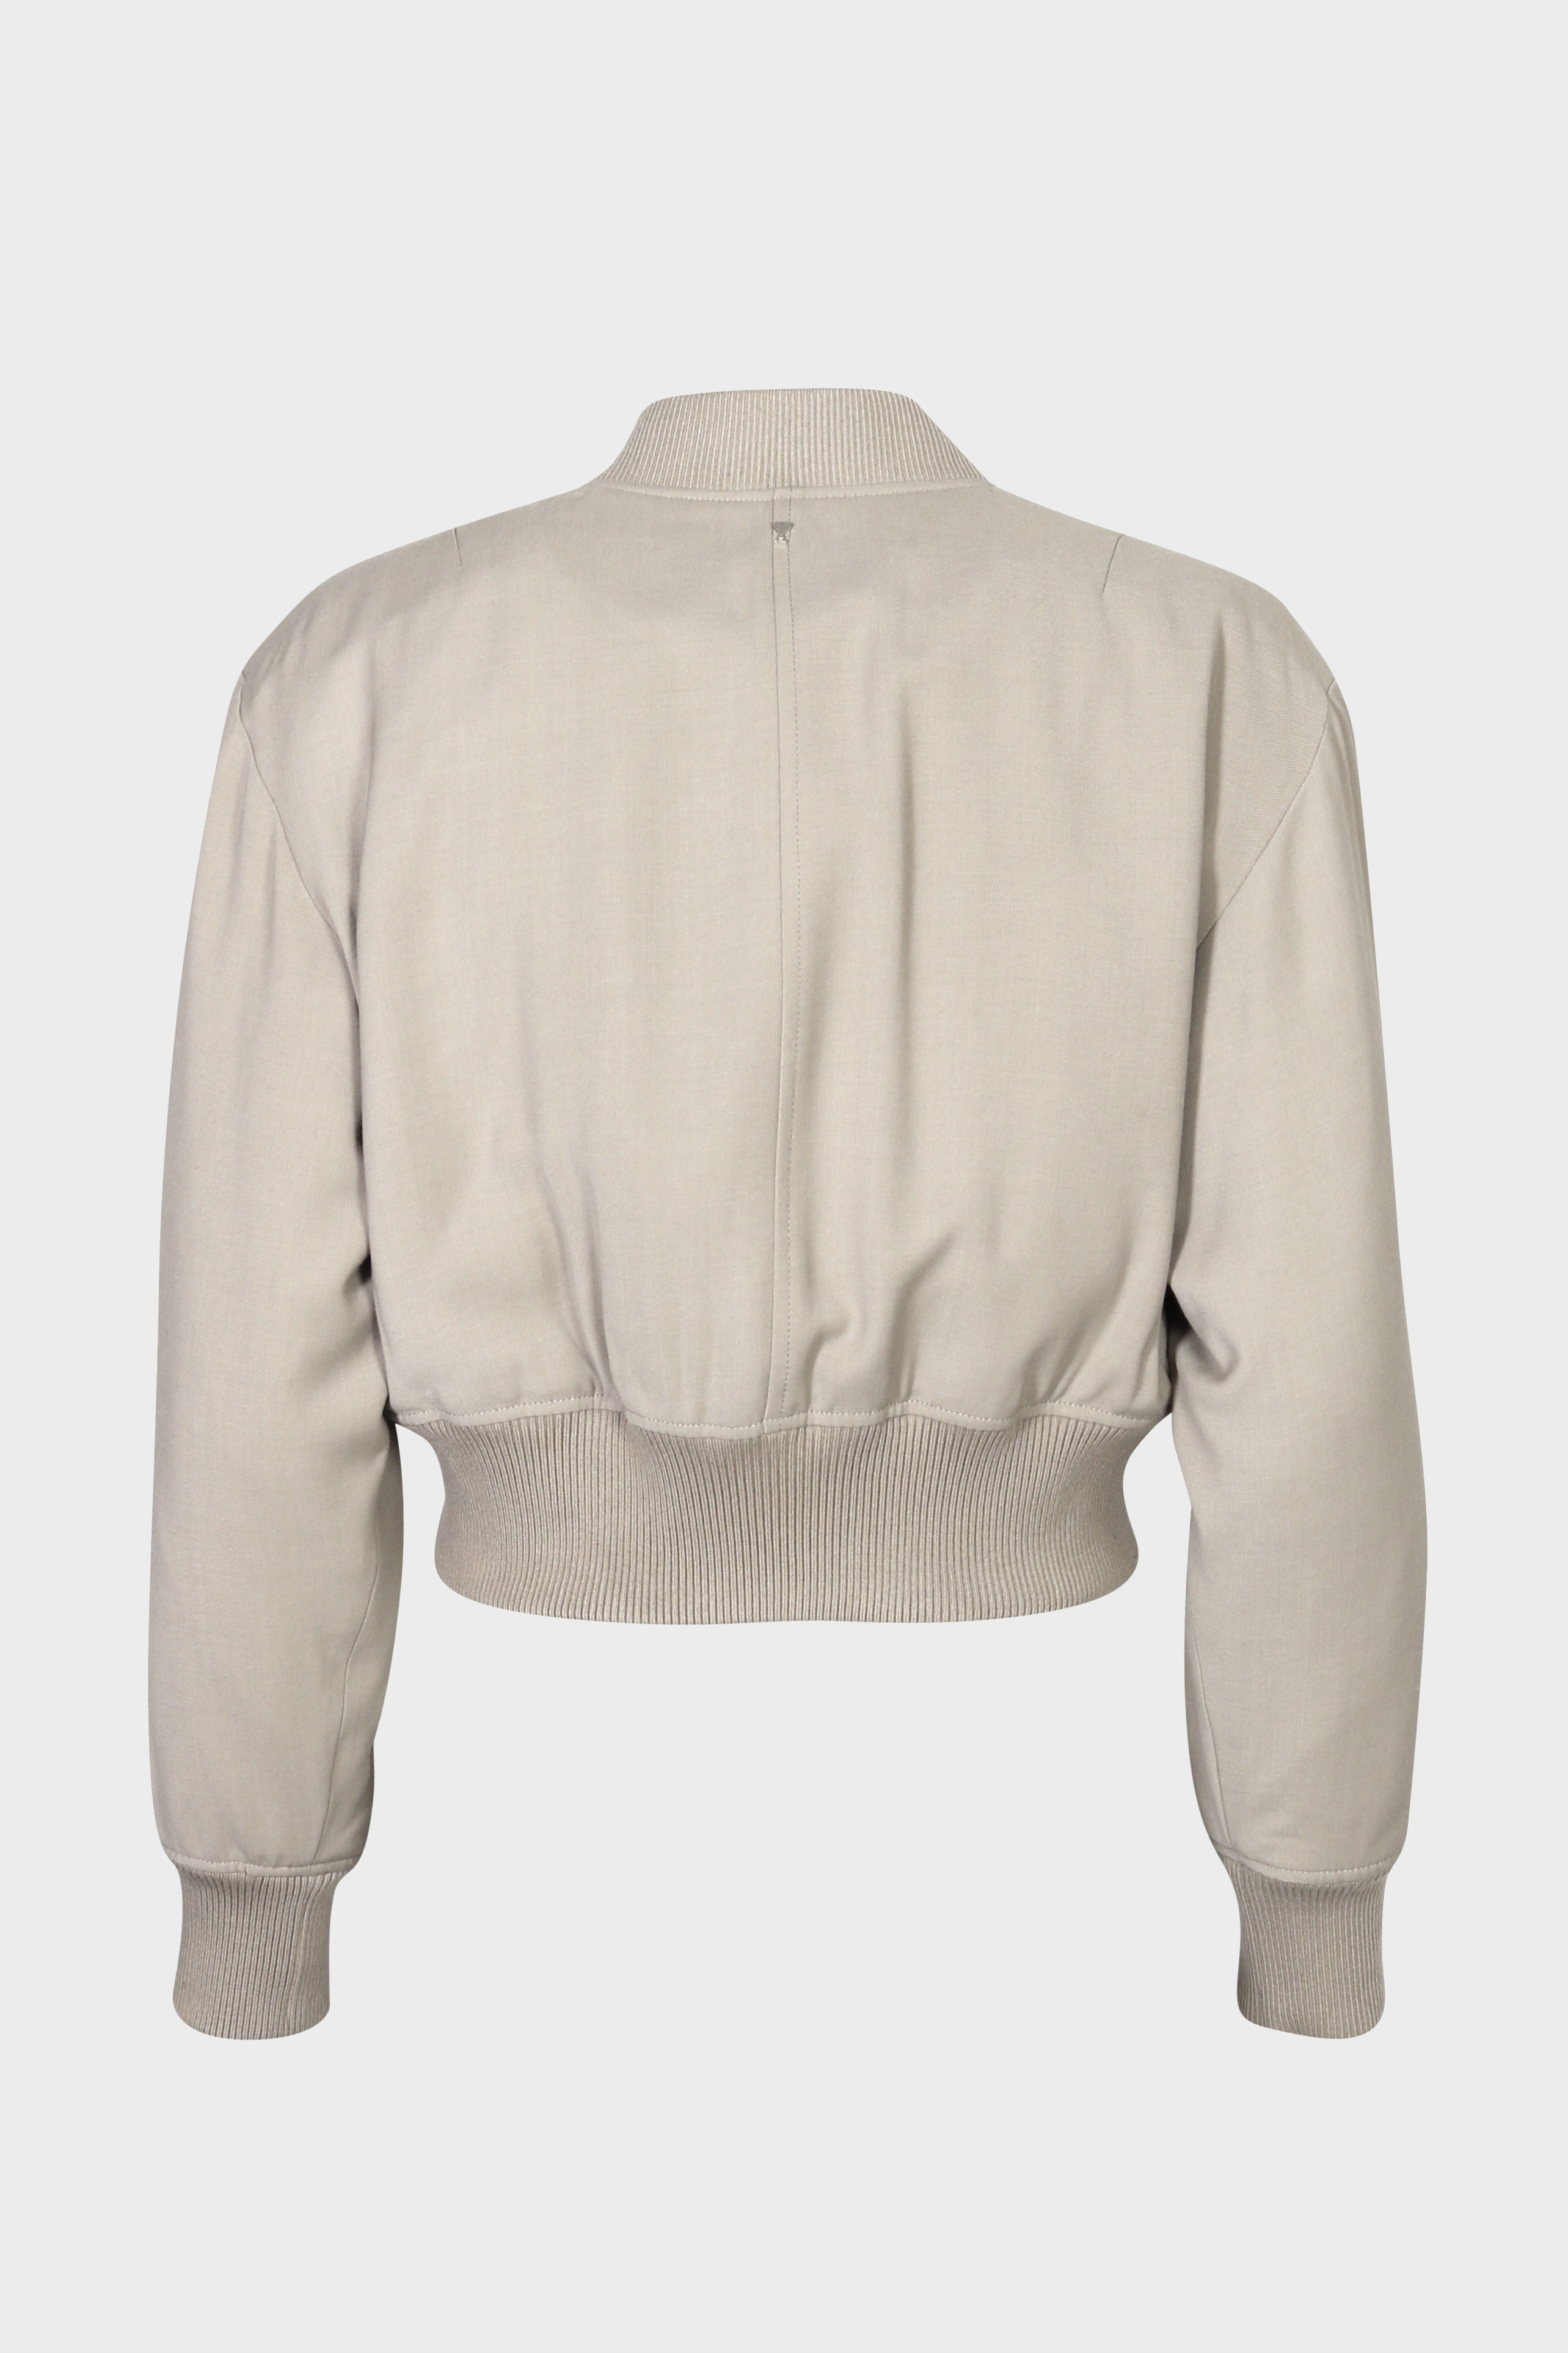 AMI PARIS Bomber Jacket in Light Taupe S